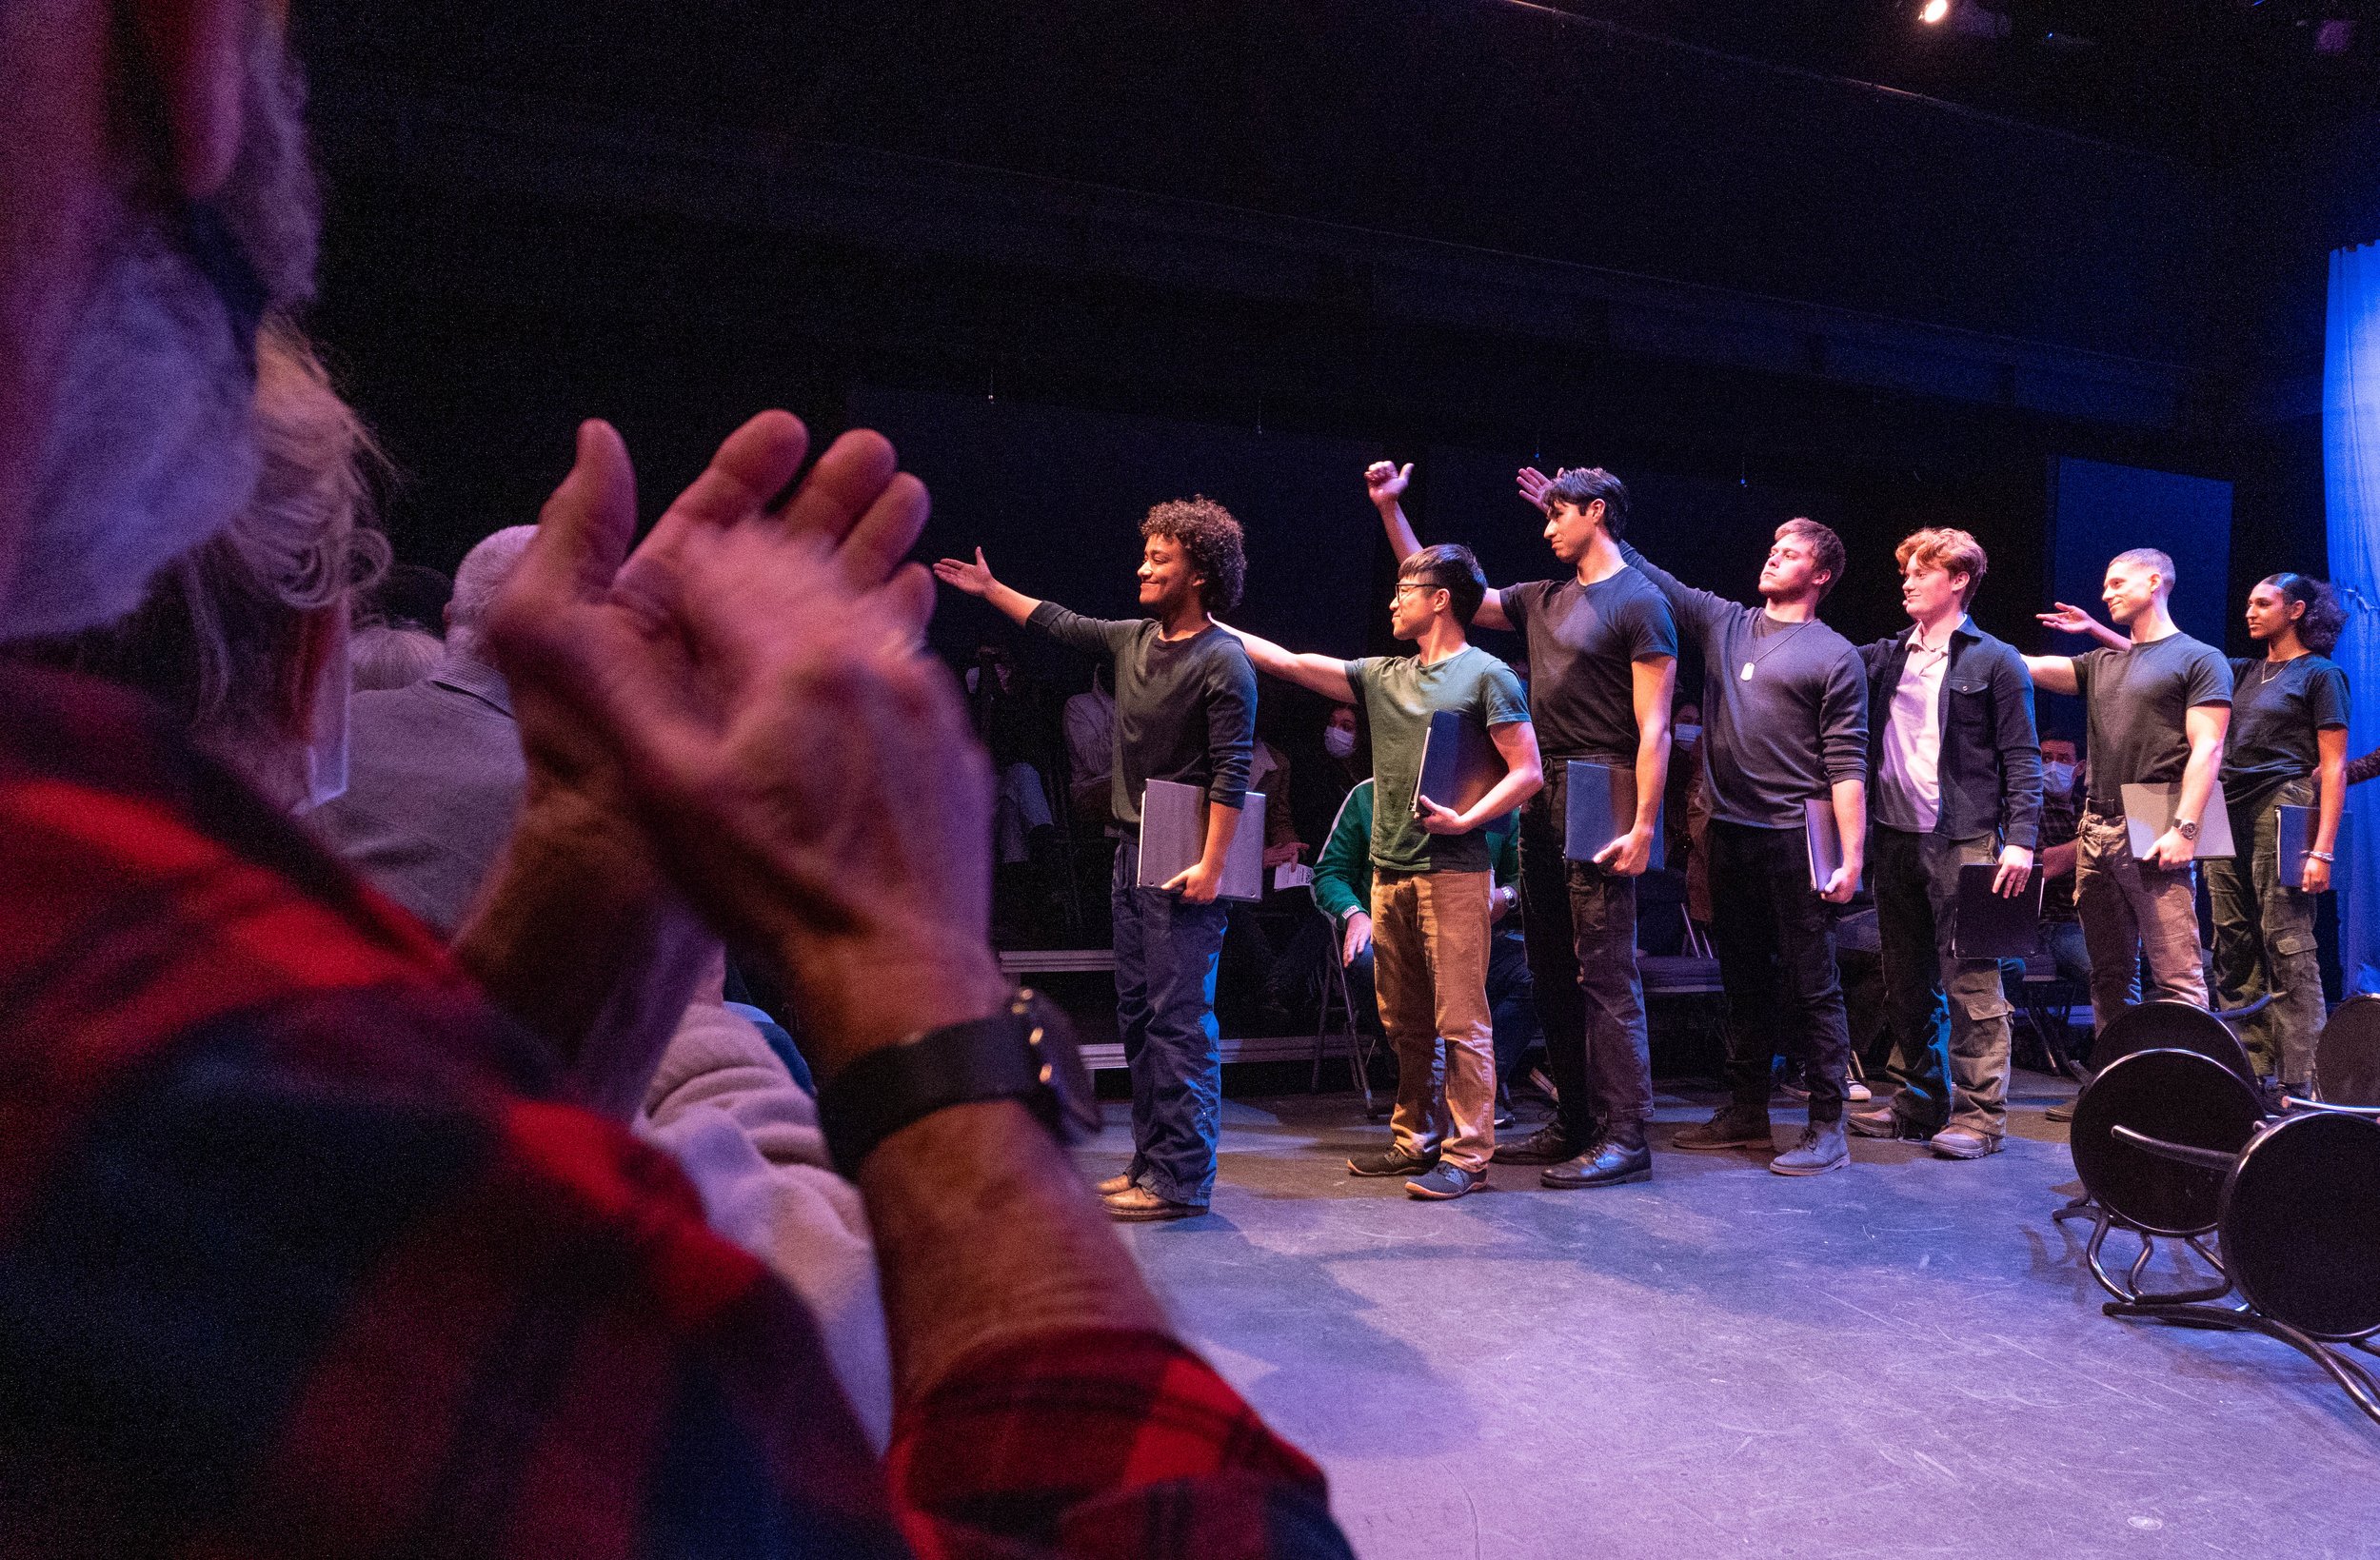  Audiences applaud the cast of War Words as they take a bow after their performance. War Words is a play written by Michelle Kholos Brooks and is part of a national initiative to honor veterans through theatrical storytelling. The play was in collabo